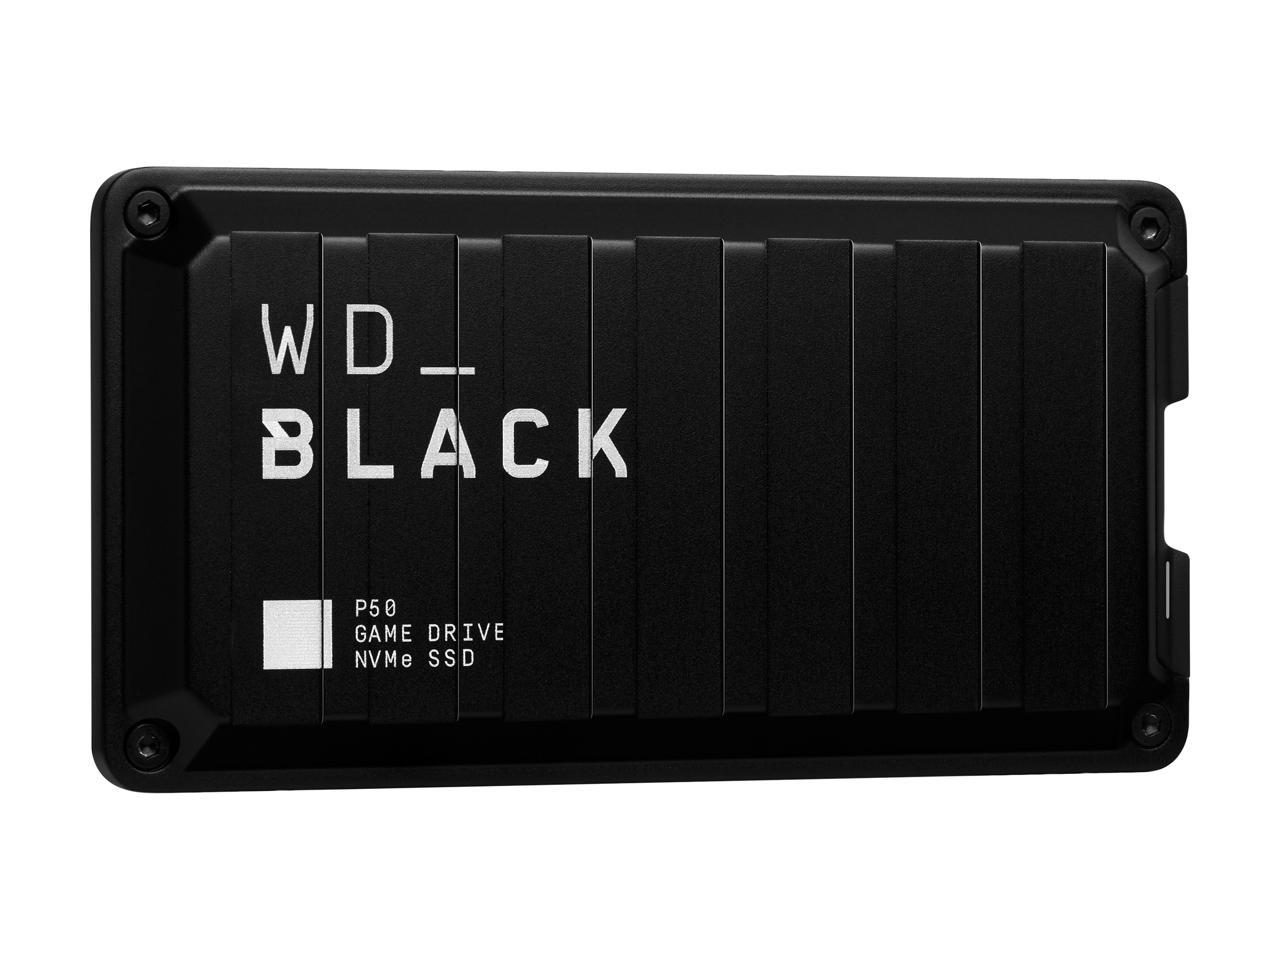 Wd Black 1tb P50 Game Drive Portable External Ssd Compatible With Ps4 Xbox One Pc Mac Wdba3s0010bbk Wesn Newegg Com